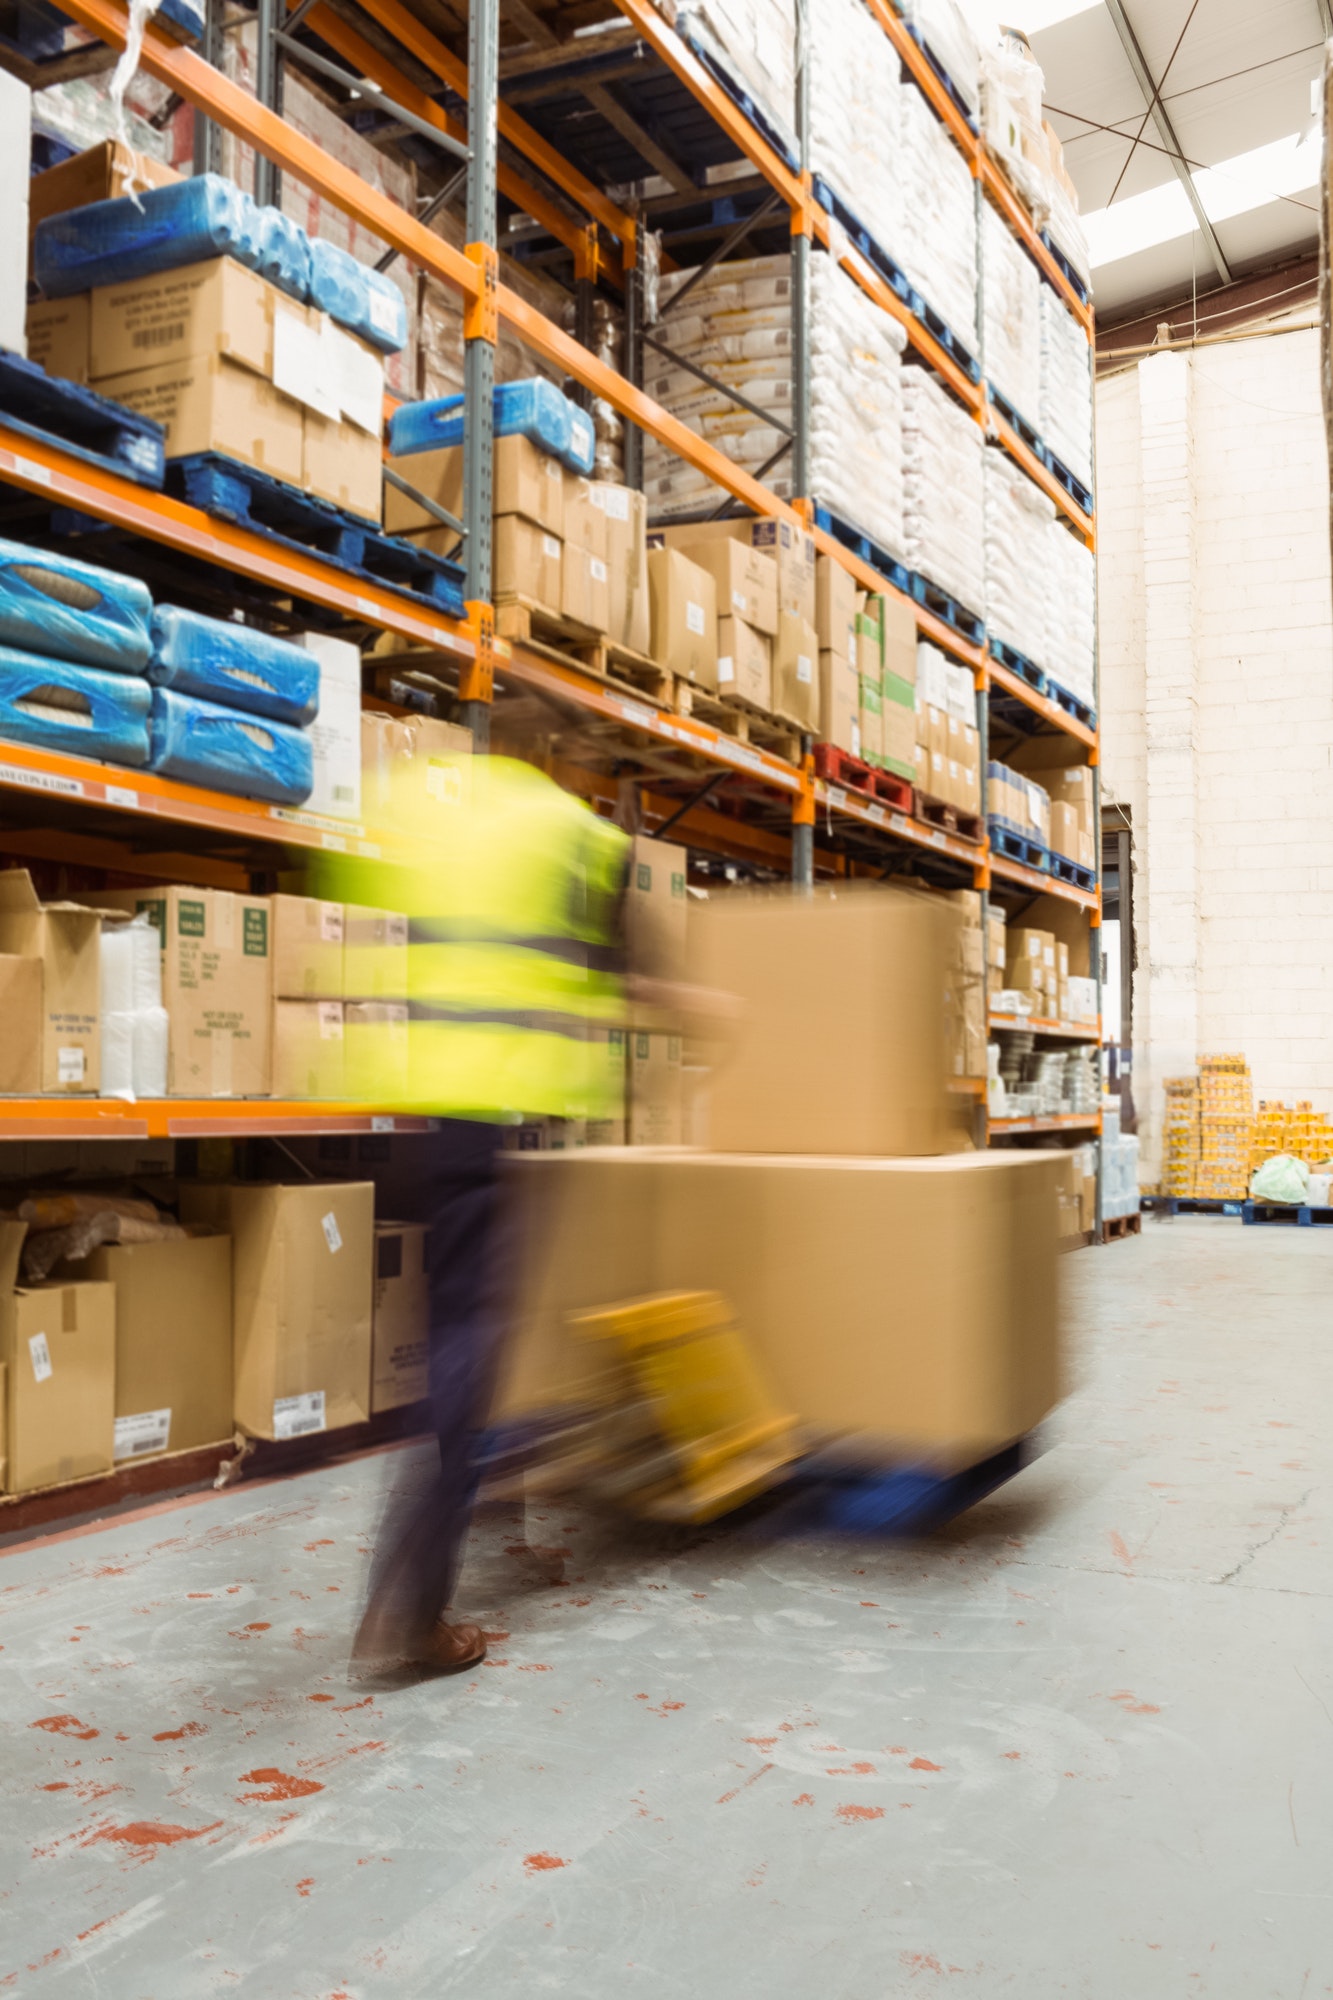 Worker pushing trolley with boxes in a blur in a large warehouse